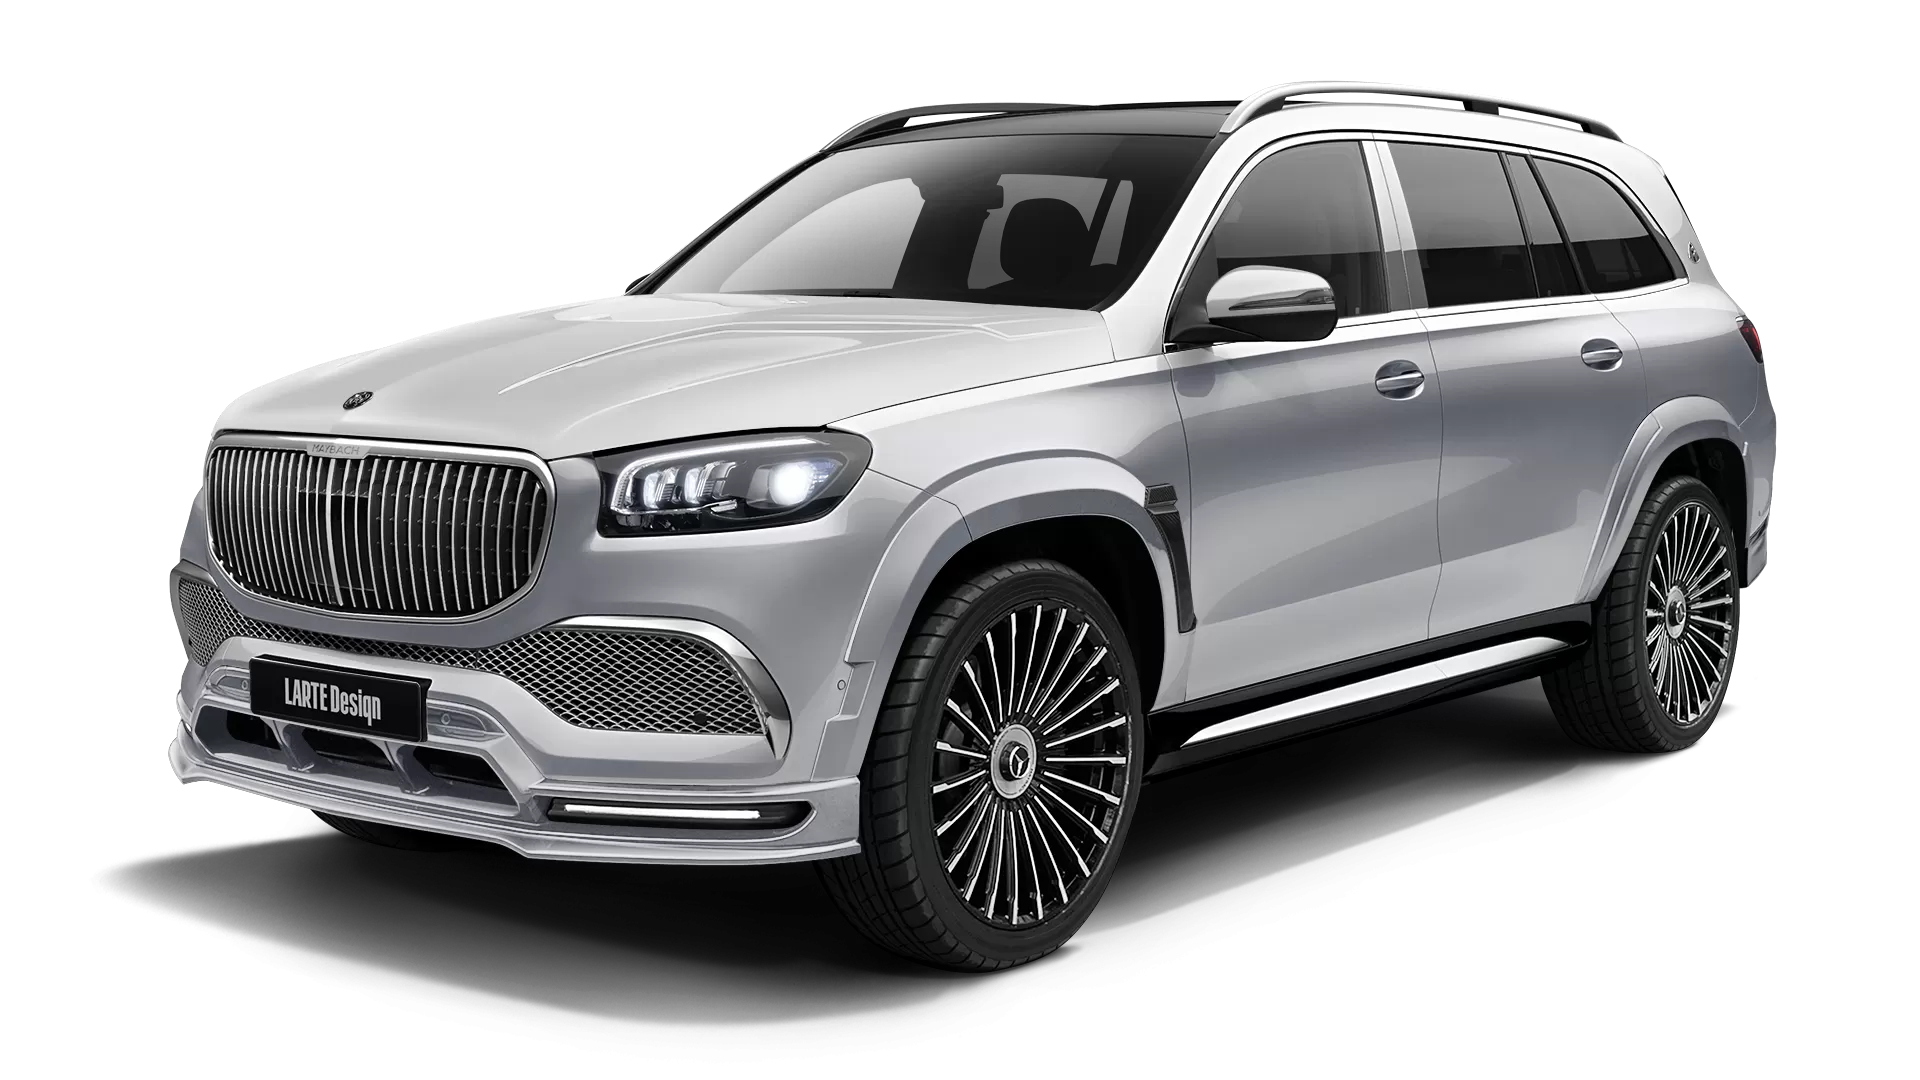 Mercedes Maybach GLS 600 with painted body kit: front view shown in High Tech Silver & Diamond White